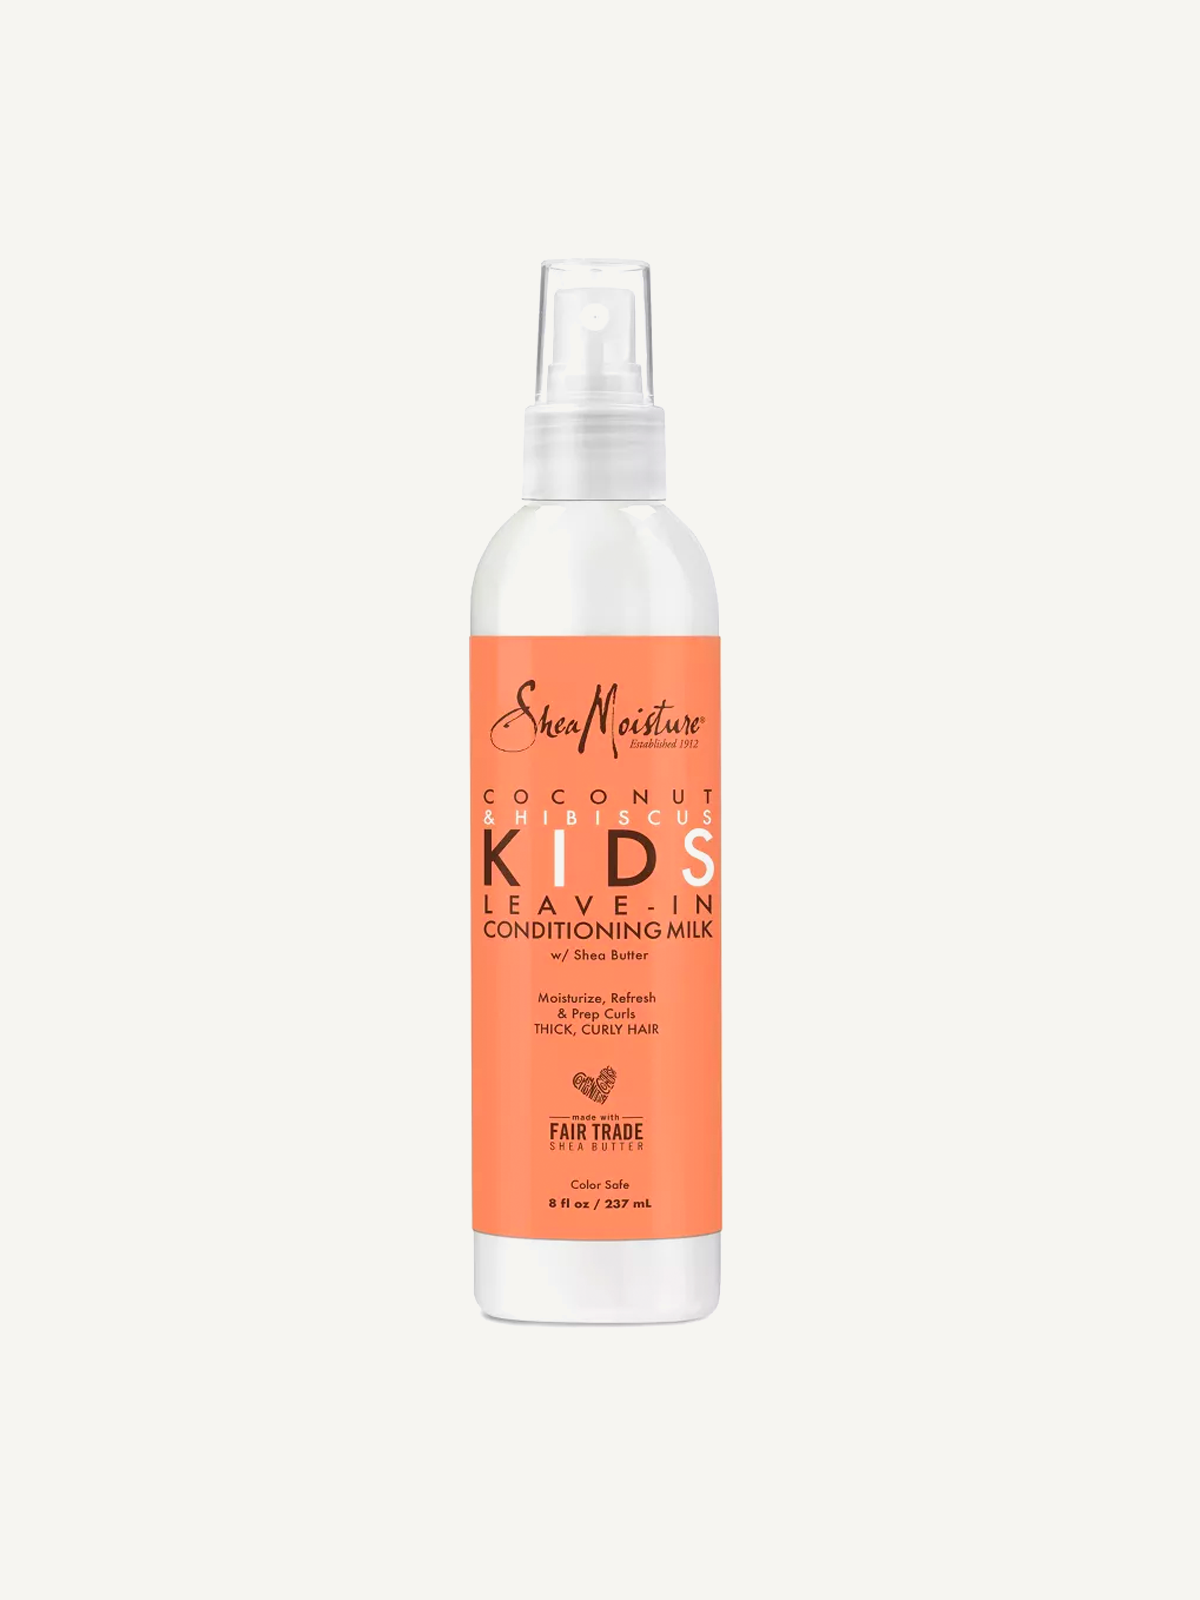 SheaMoisture – Coconut & Hibiscus Kids Leave-In Conditioning Milk